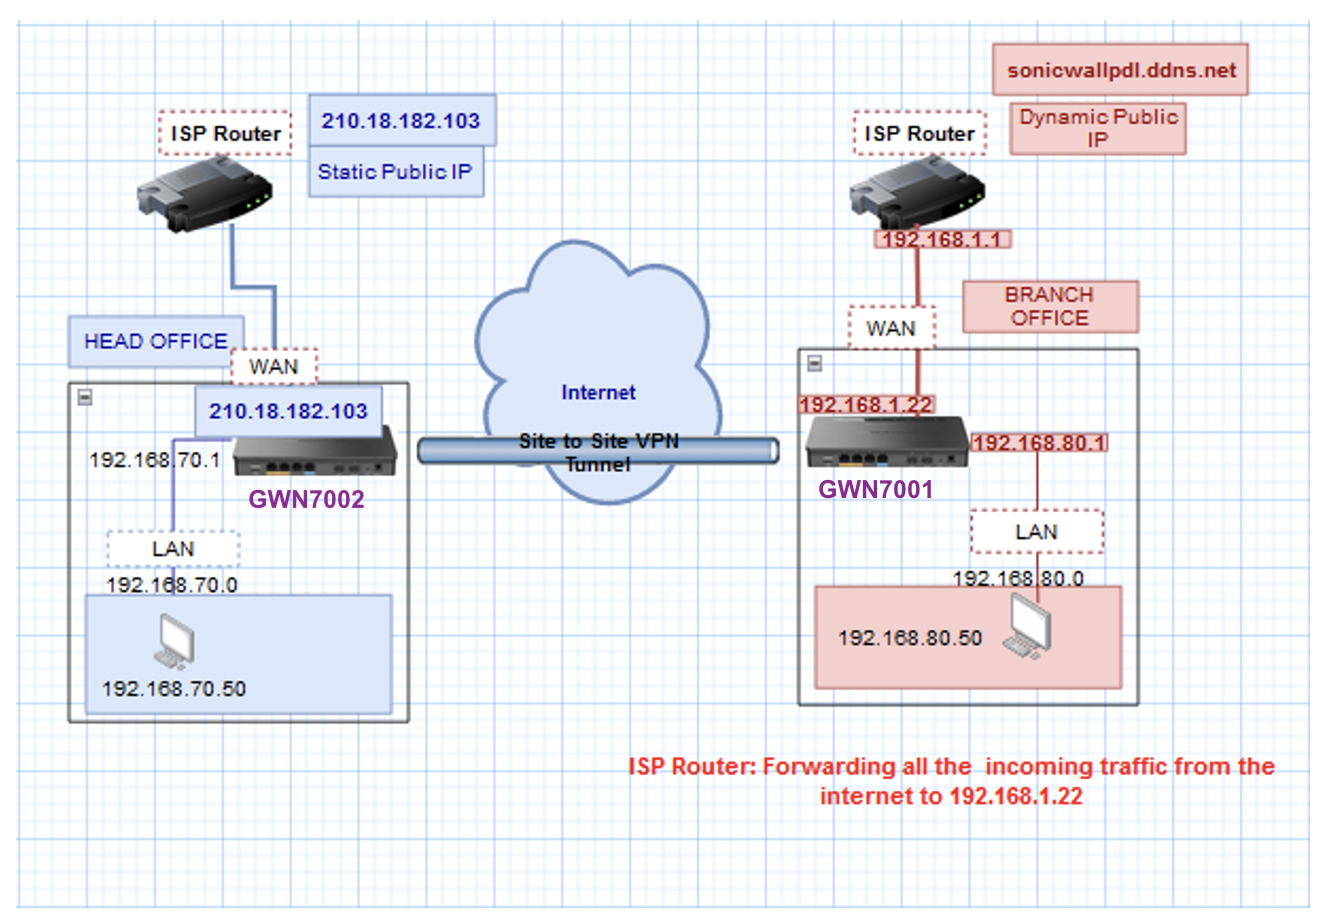 site-to-site IPSec in Grandstream Router GWN700X behind NAT (SonicWall)